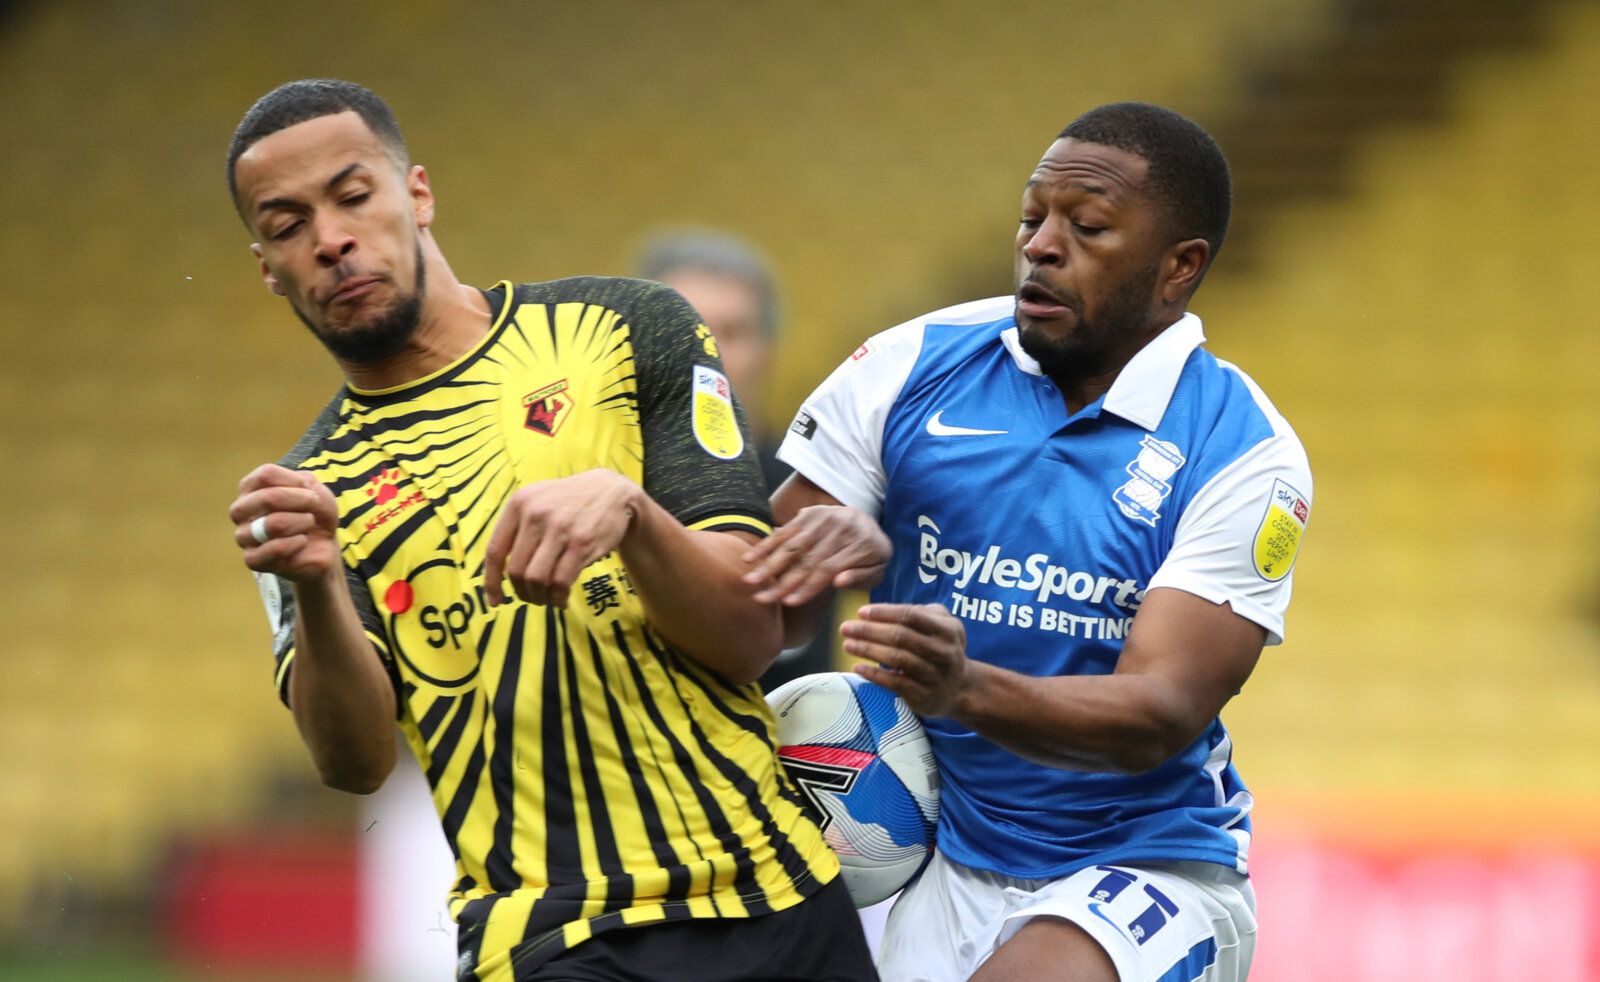 Soccer Football - Championship - Watford v Birmingham City - Vicarage Road, Watford, Britain - March 20, 2021 Watford's William Troost-Ekong in action with Birmingham City's Jeremie Bela Action Images/Peter Cziborra EDITORIAL USE ONLY. No use with unauthorized audio, video, data, fixture lists, club/league logos or 'live' services. Online in-match use limited to 75 images, no video emulation. No use in betting, games or single club /league/player publications.  Please contact your account repres